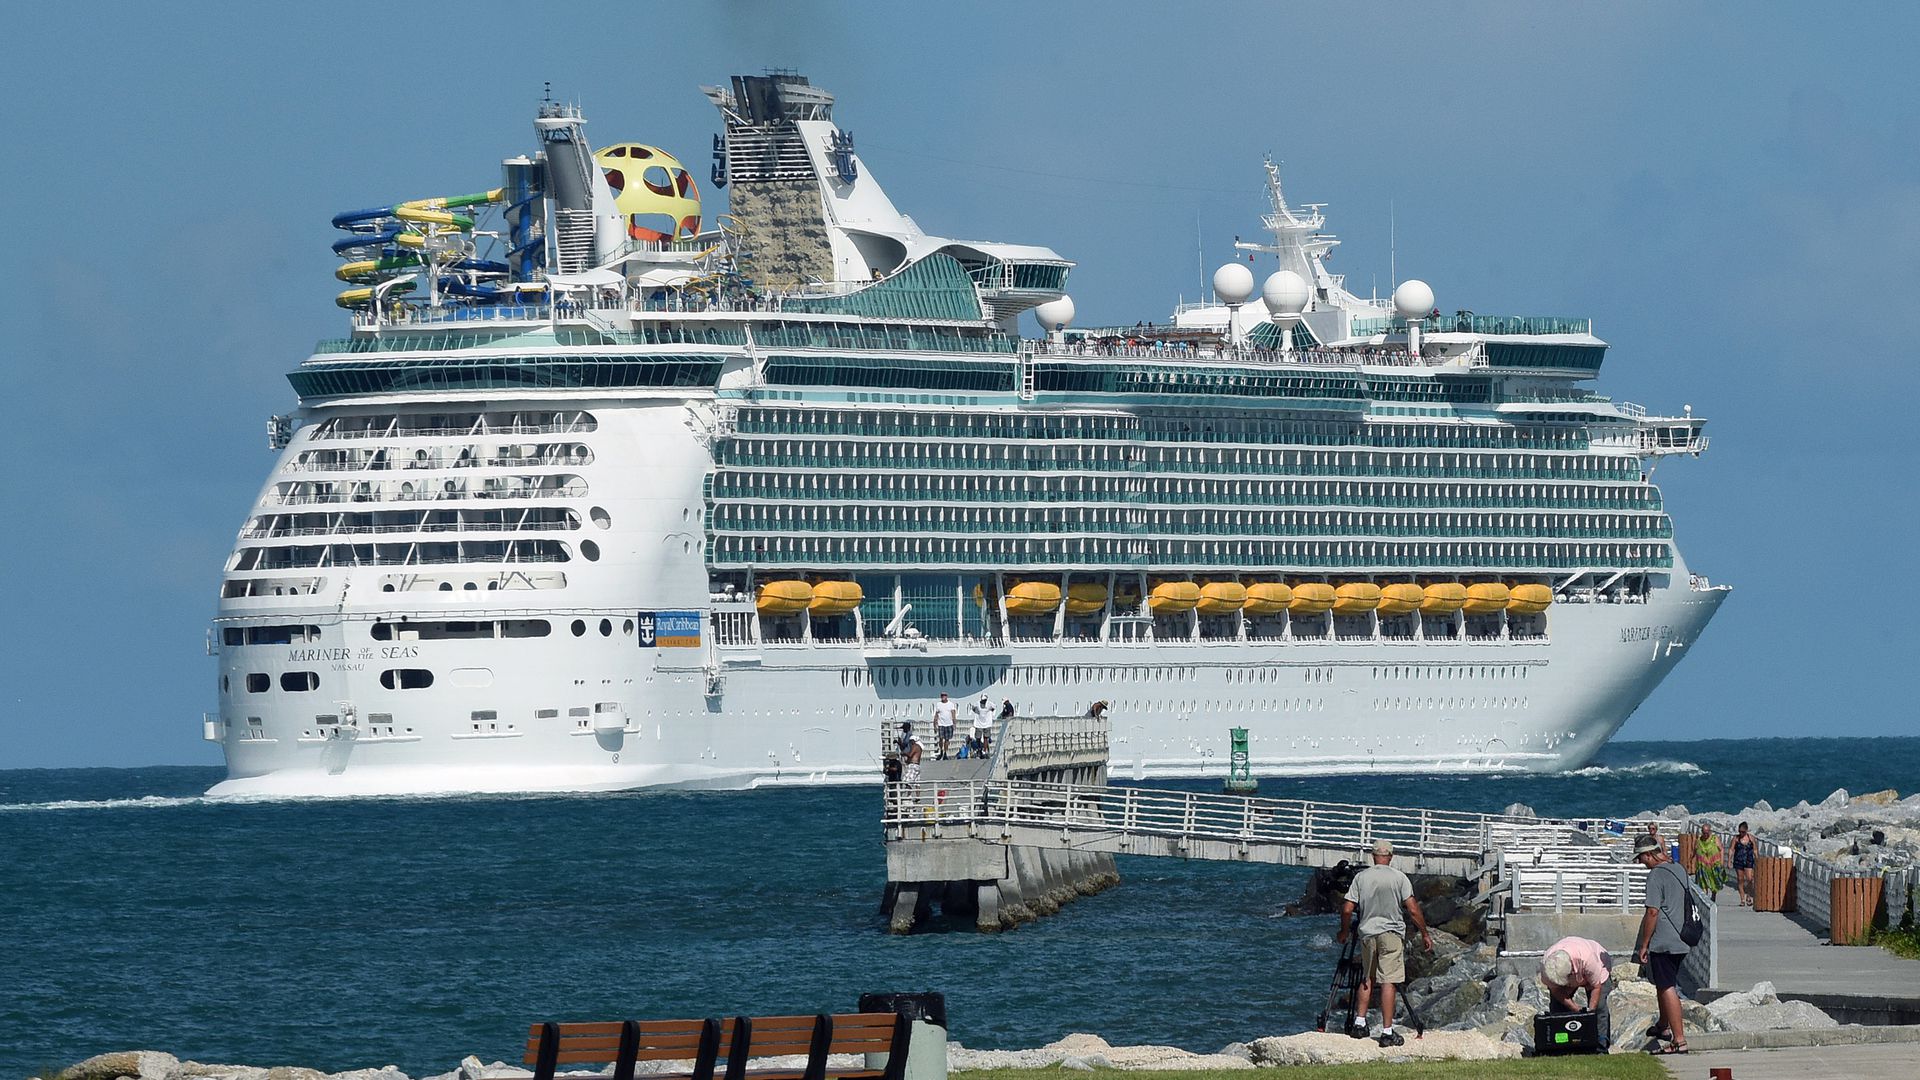 US cruise lines